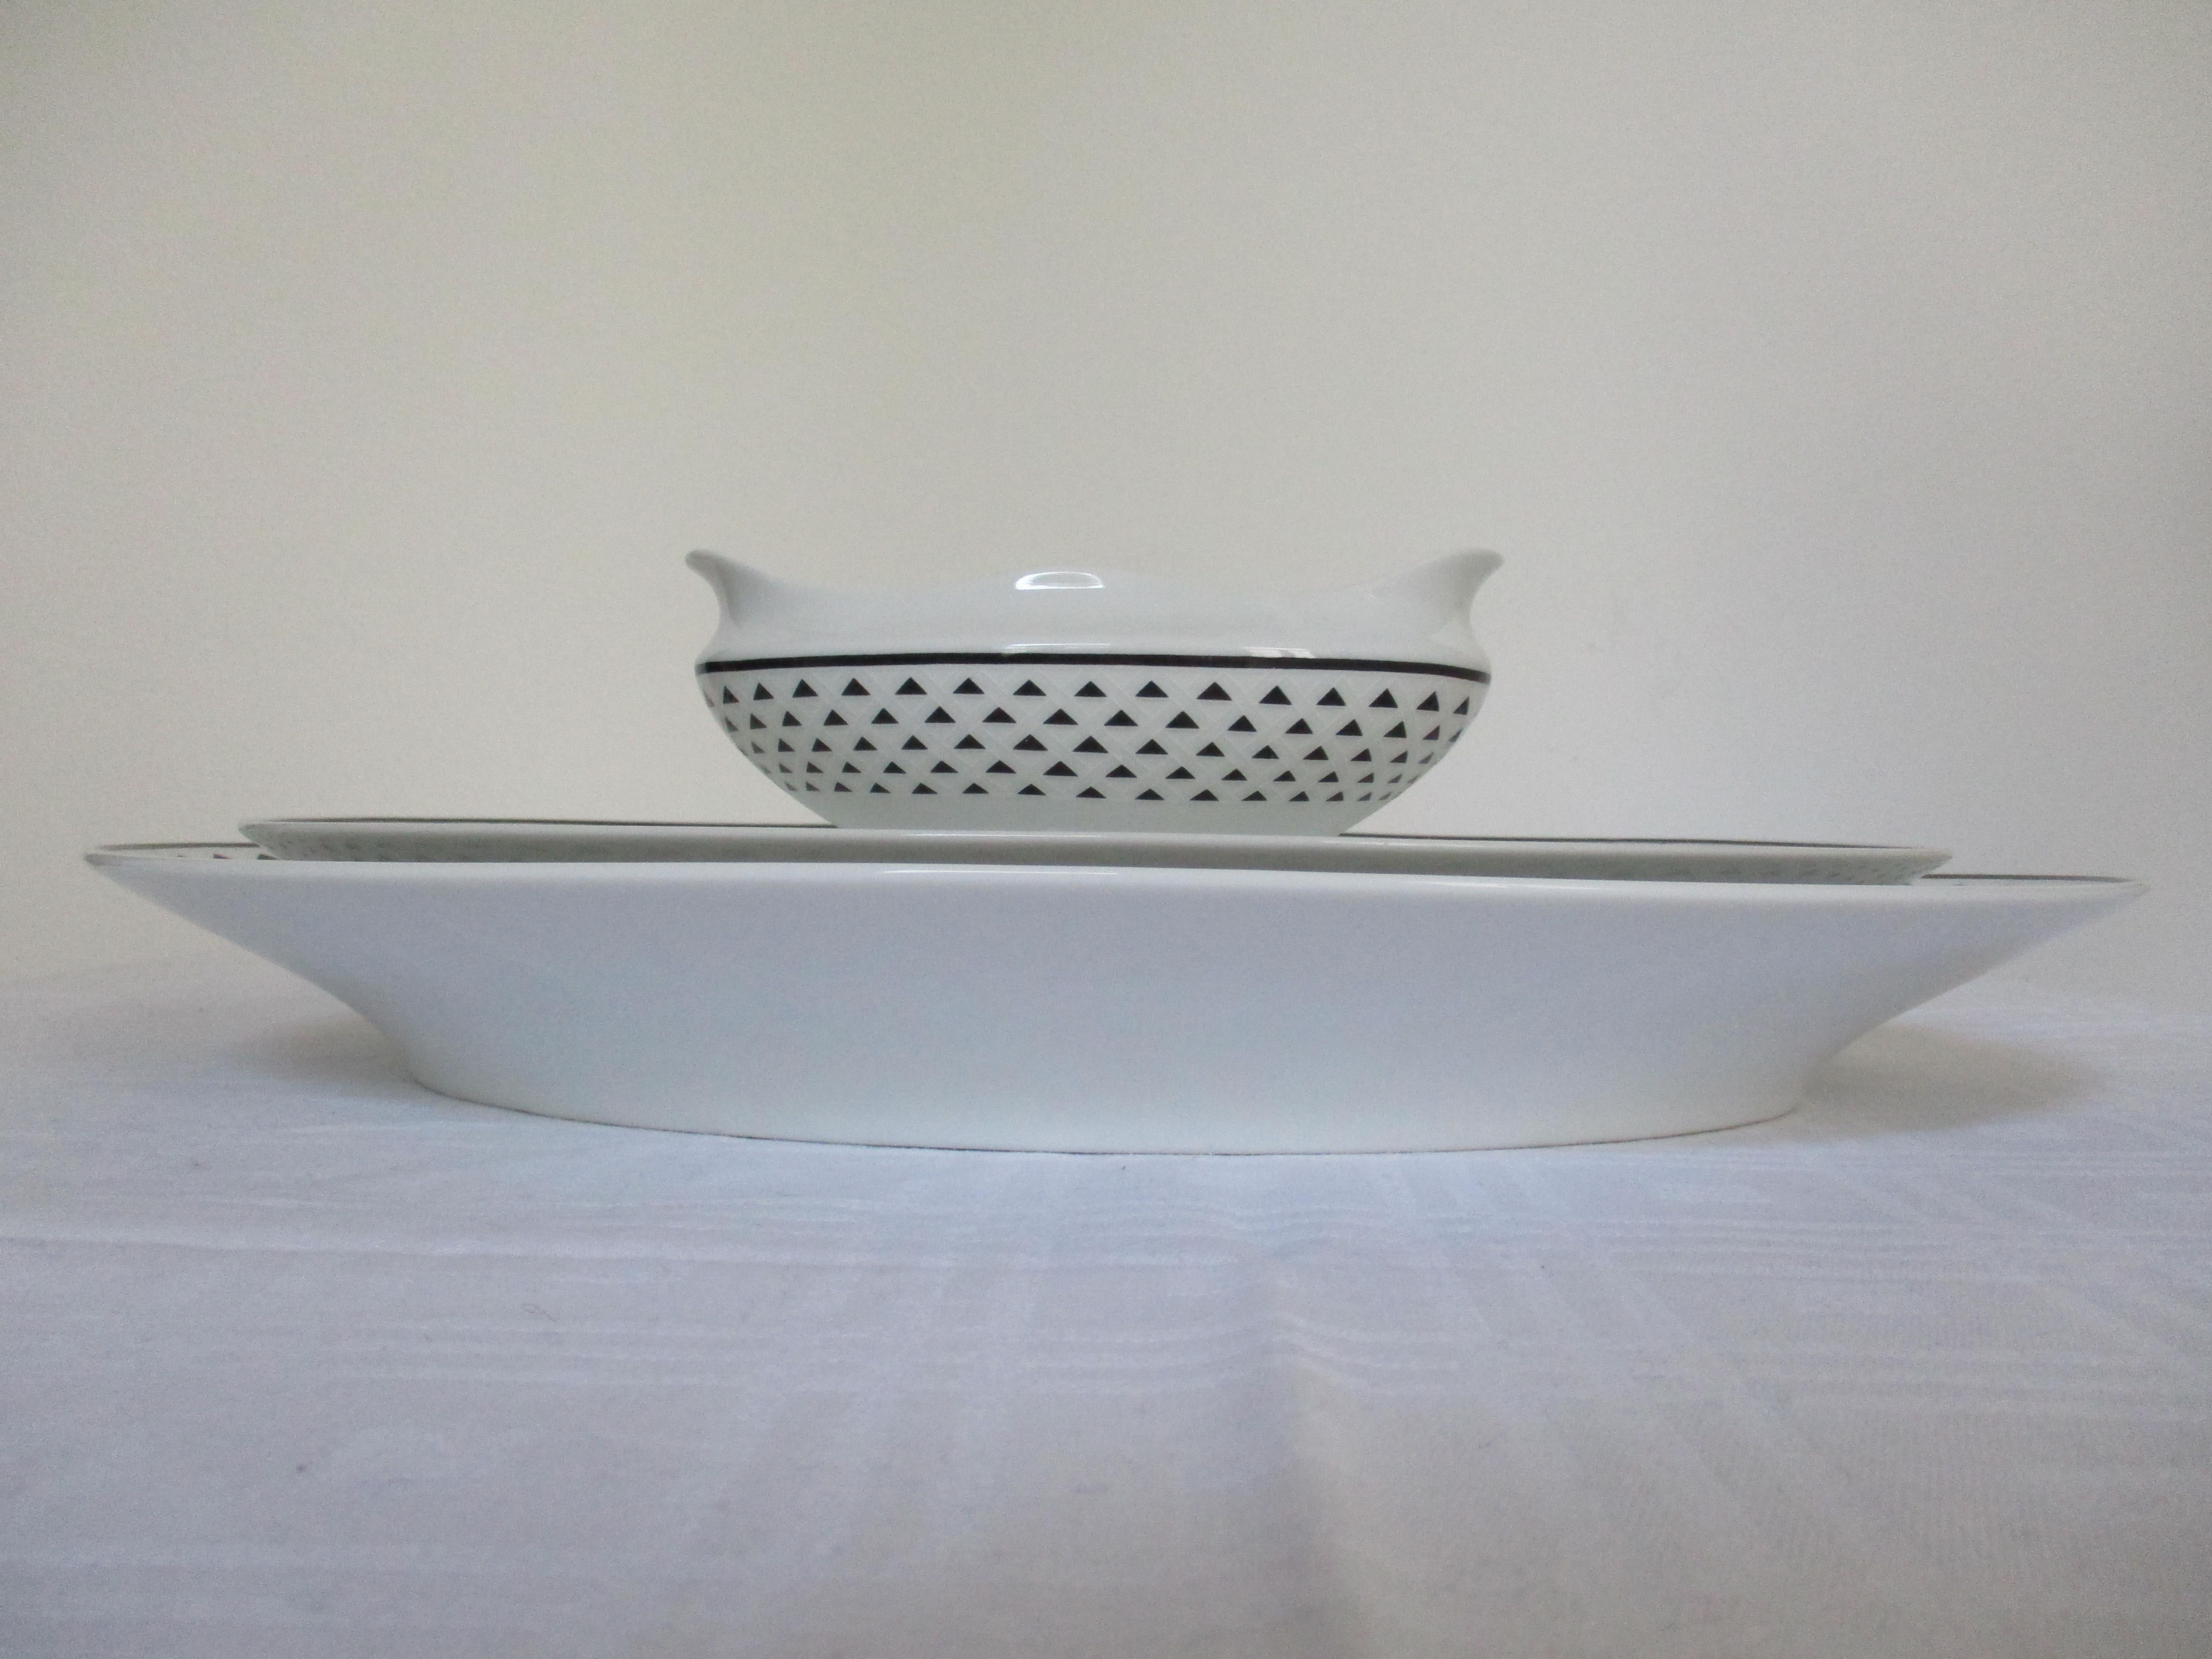 Elegant vintage serving ware from Richard Ginori, made in Italy. 